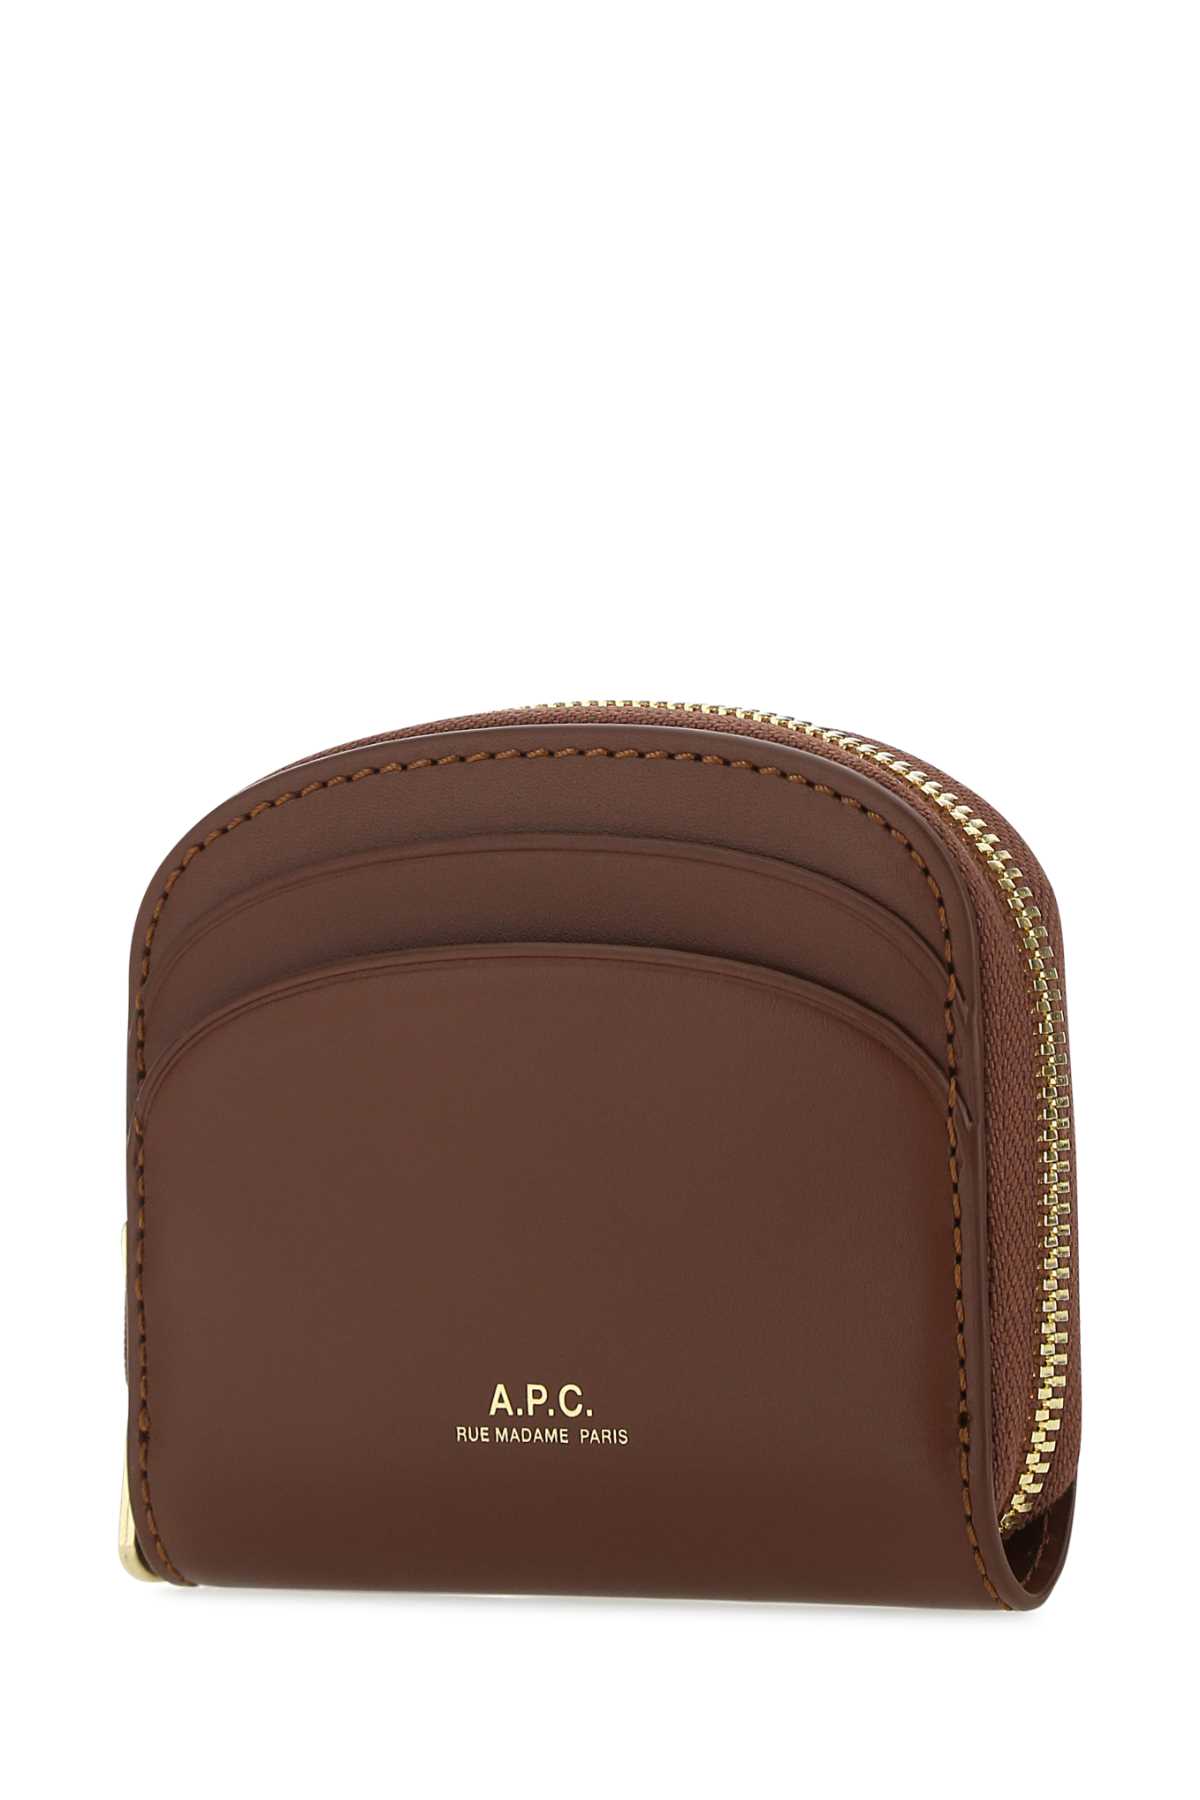 Apc Brown Leather Card Holder In Noisette